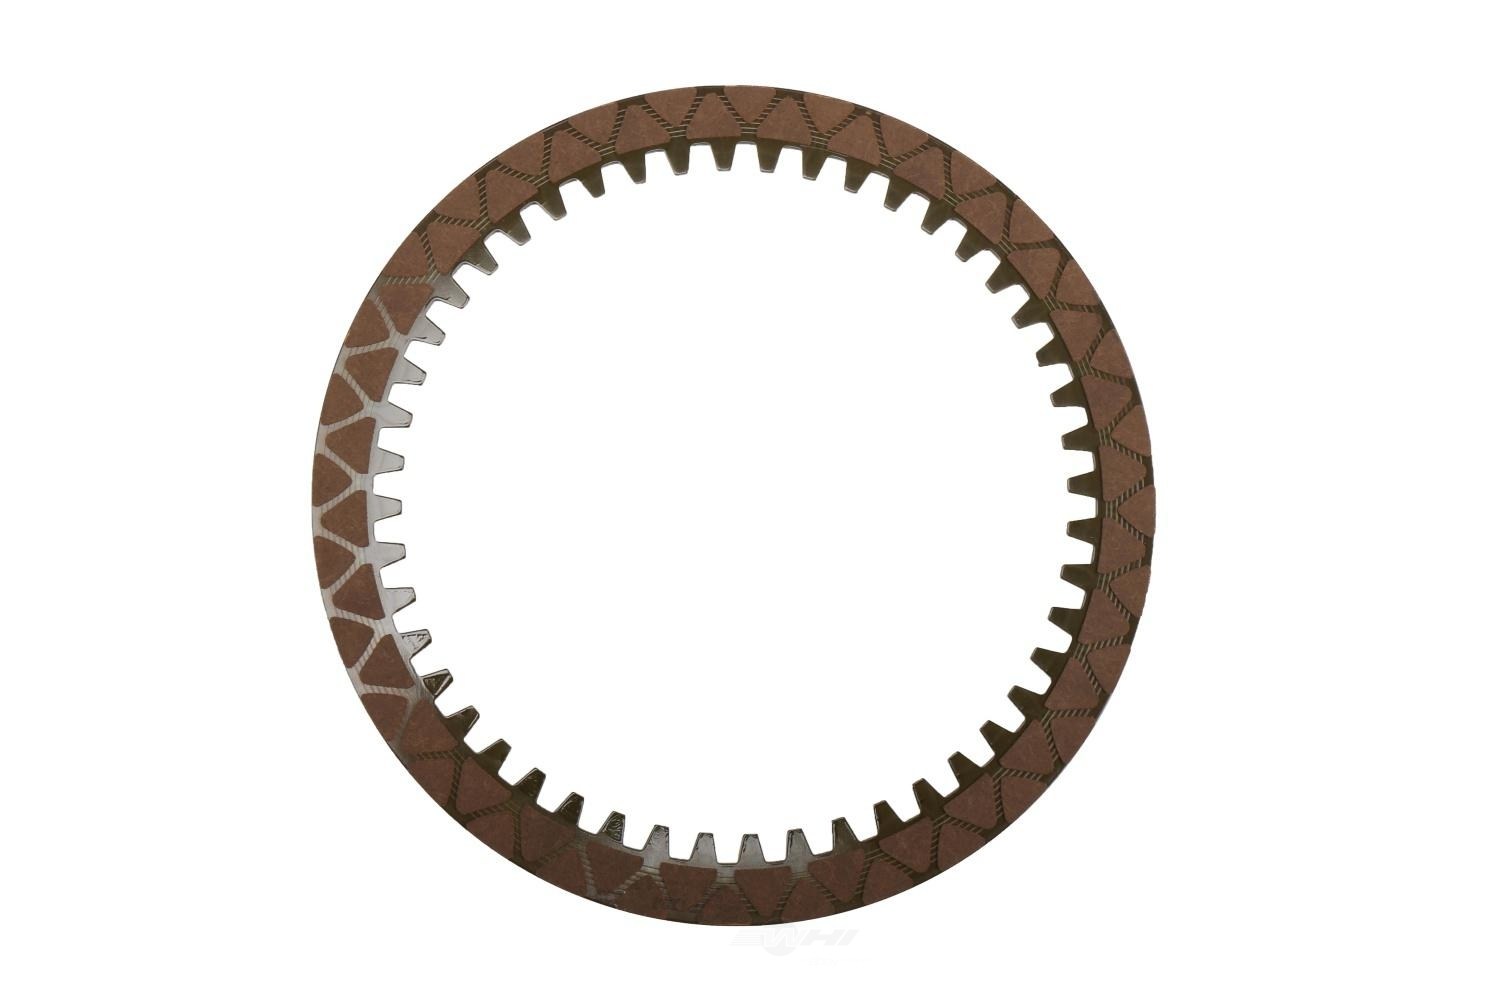 GM GENUINE PARTS - Transmission Clutch Friction Plate (1-2-3-4-5, Reverse) - GMP 24275339